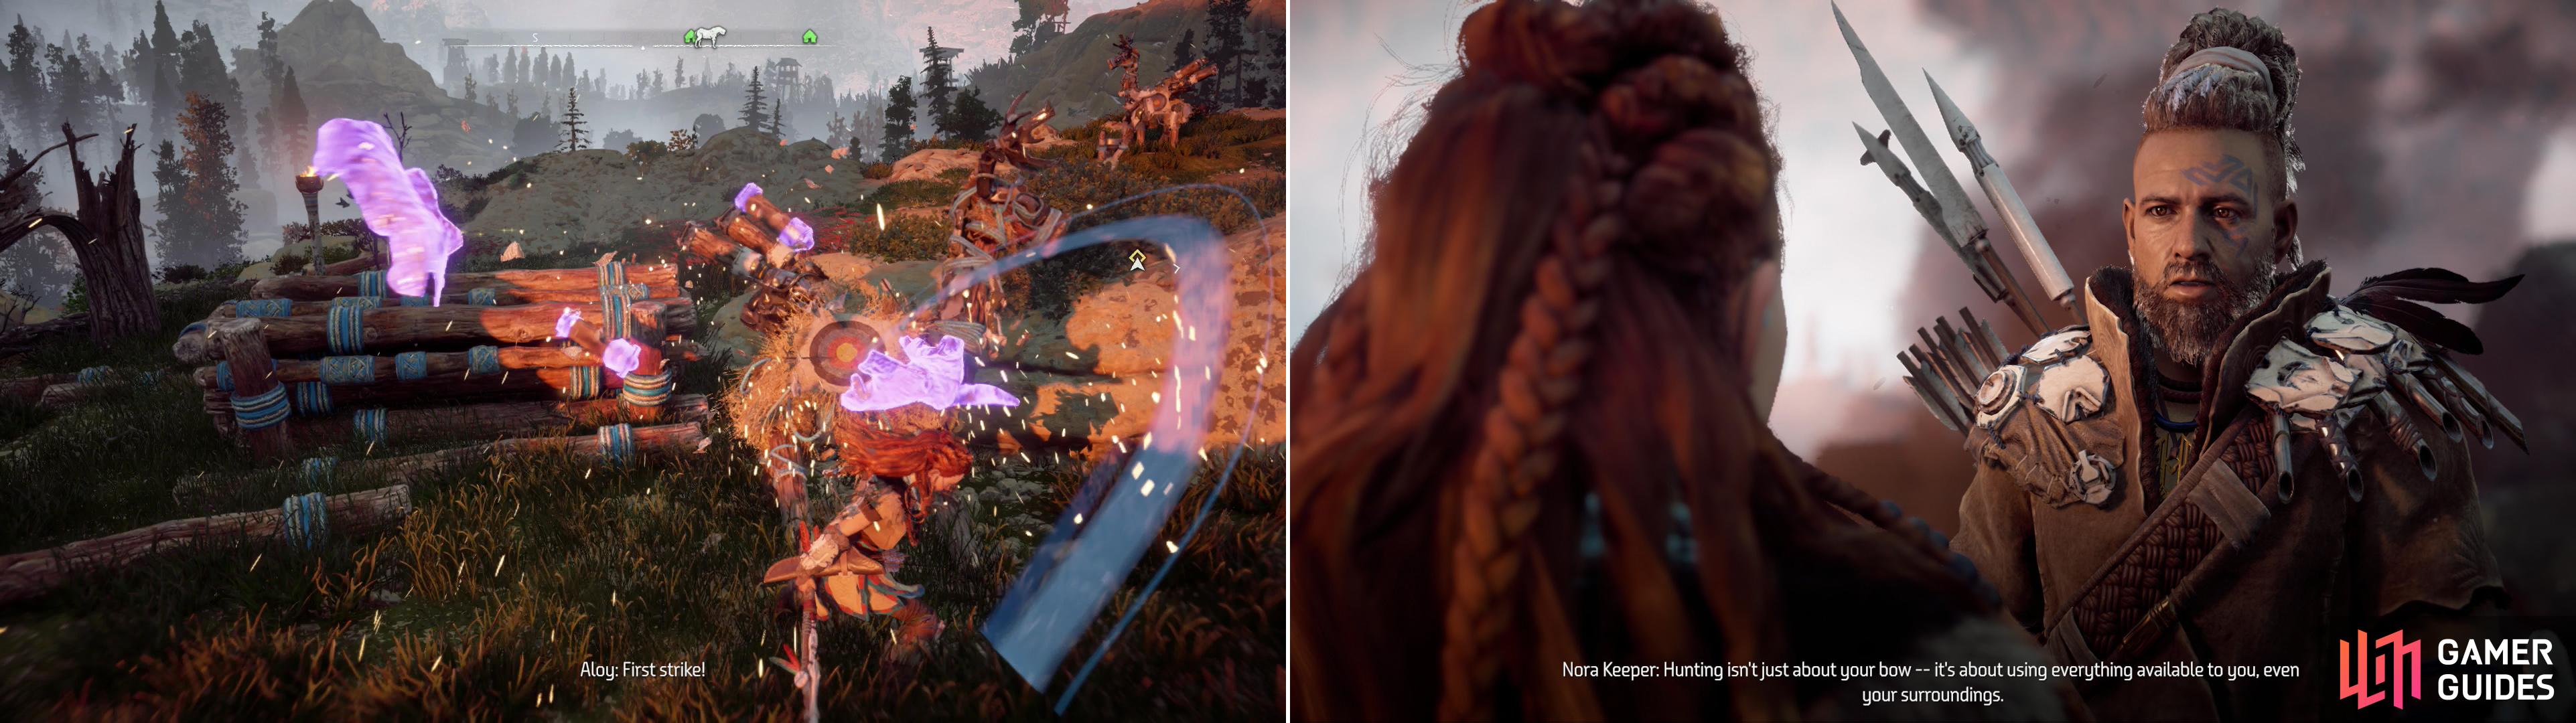 You’ll find more Training Dummies to smash near the Nora Hunting Grounds (left). Talk to the Nora Keeper to learn about the individual trials (right).